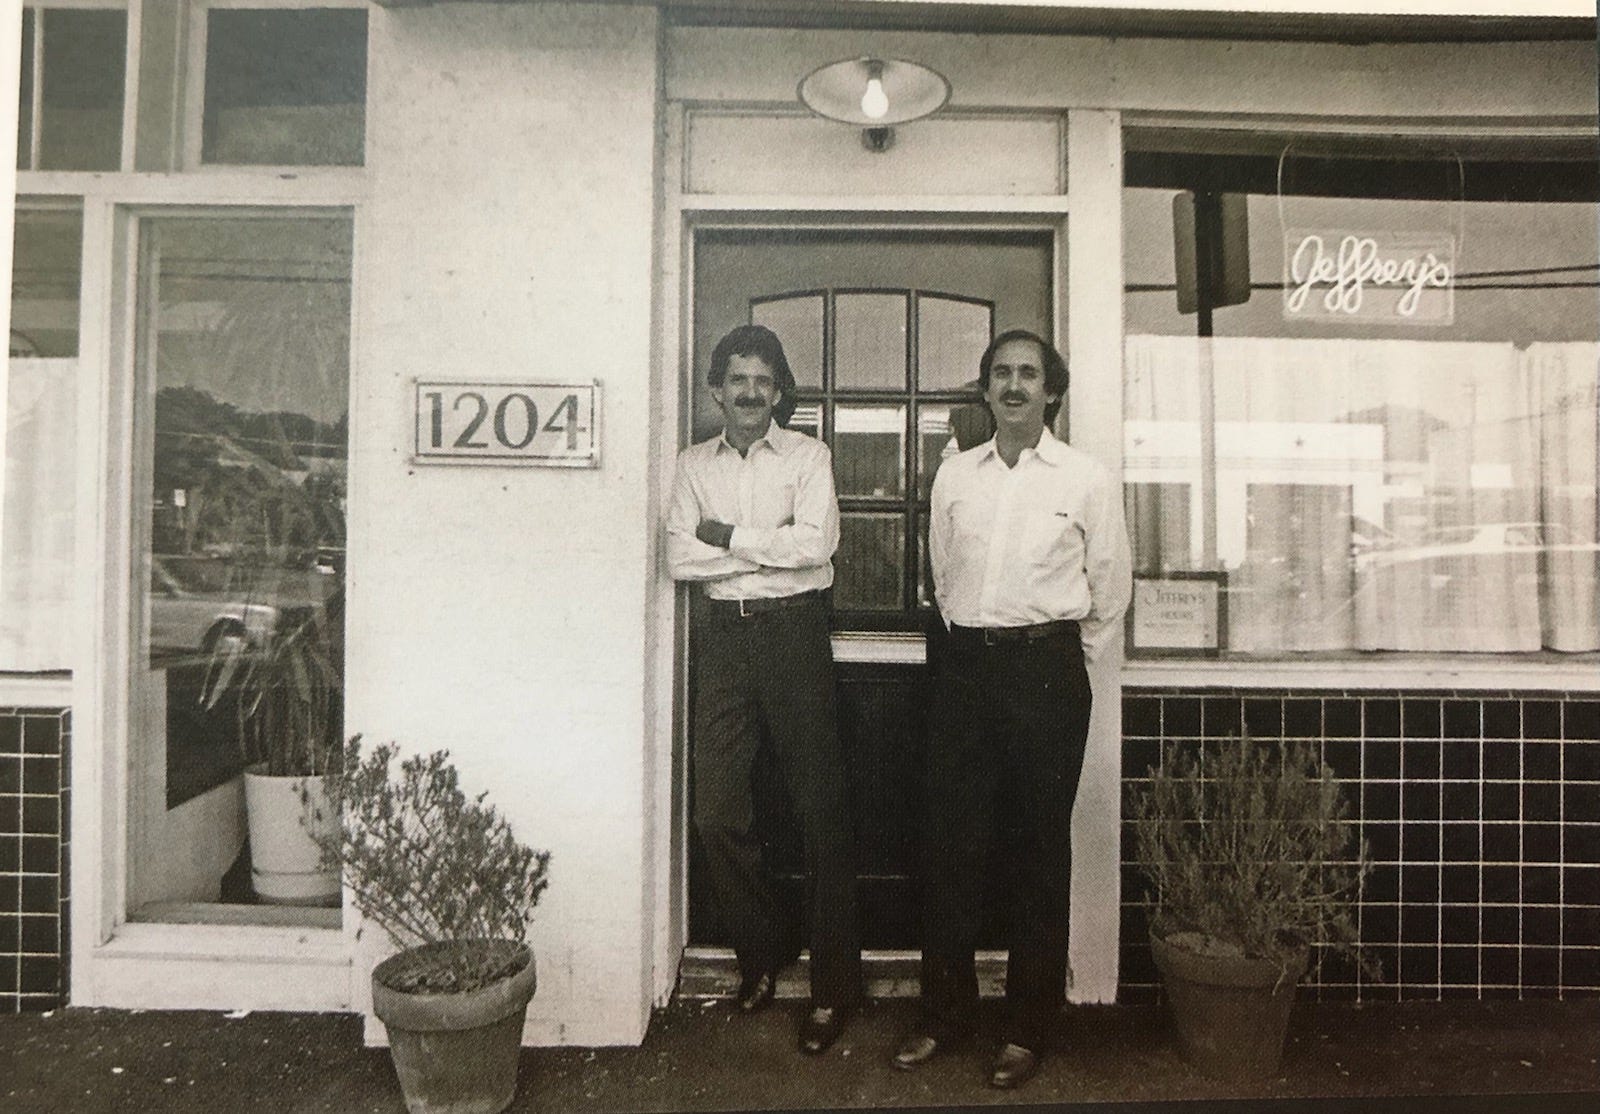 Ron Weiss, left, and Jeffrey Weinberger outside of Jeffrey's, the restaurant they opened with Ron's wife, Peggy, in 1975.